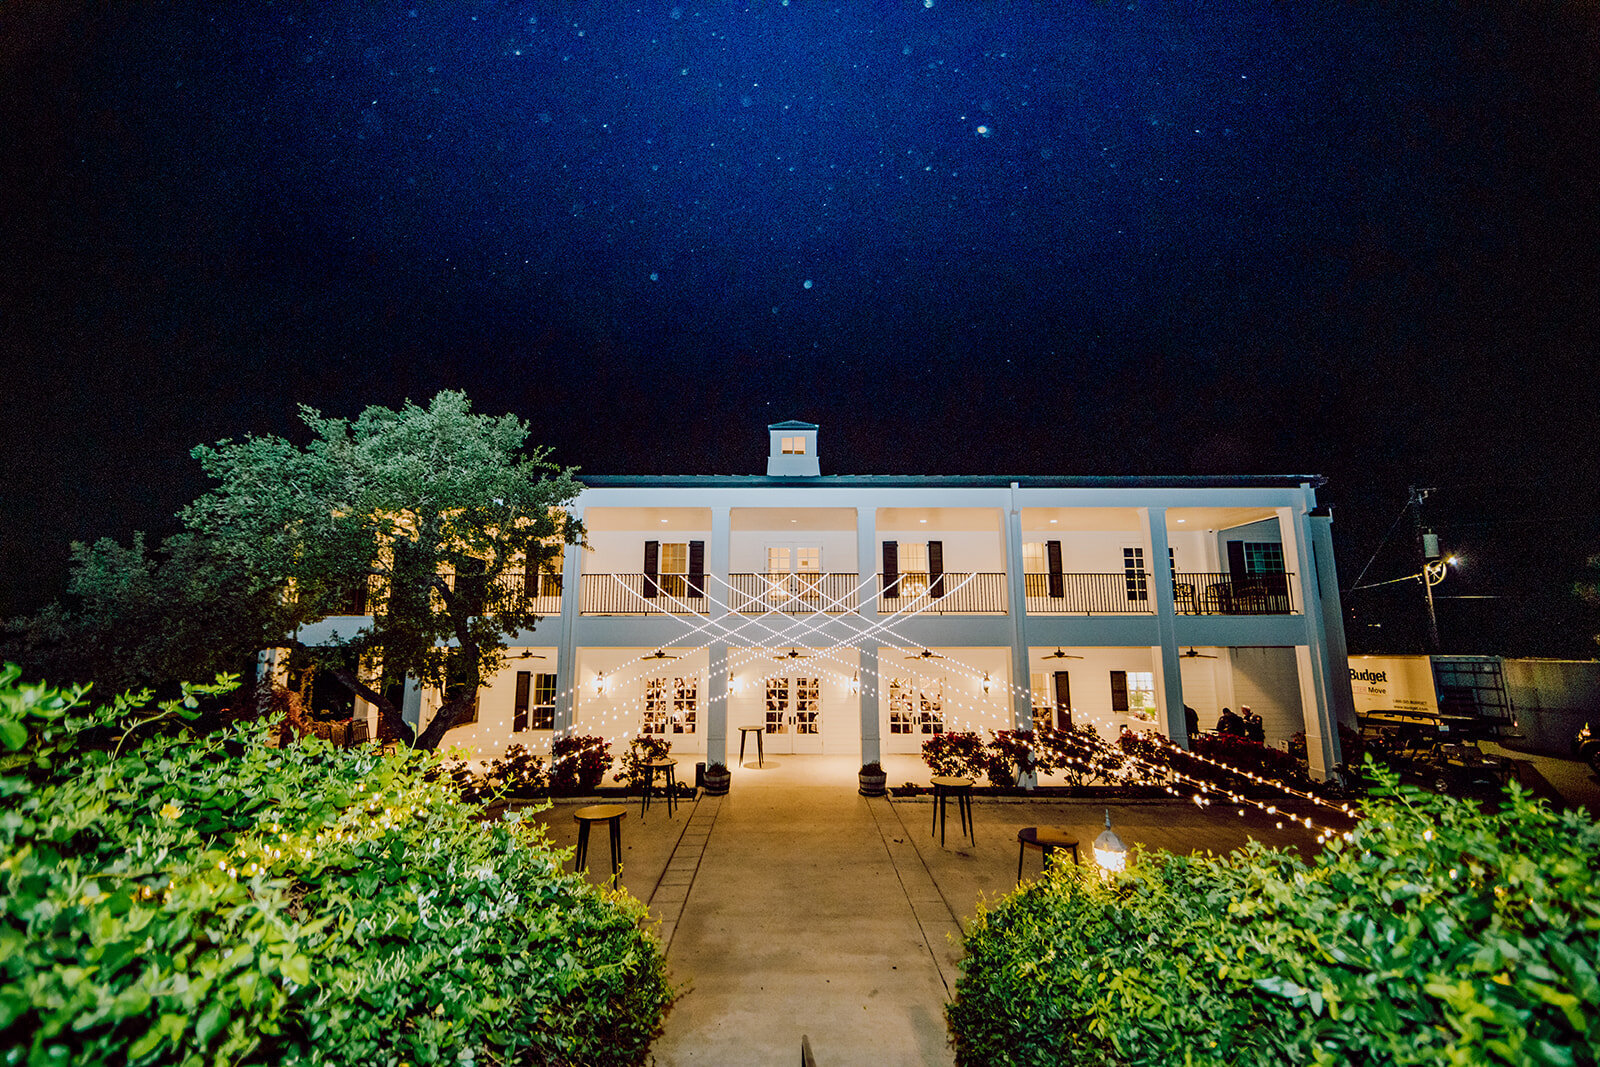 Kendall Point wedding venue at night.